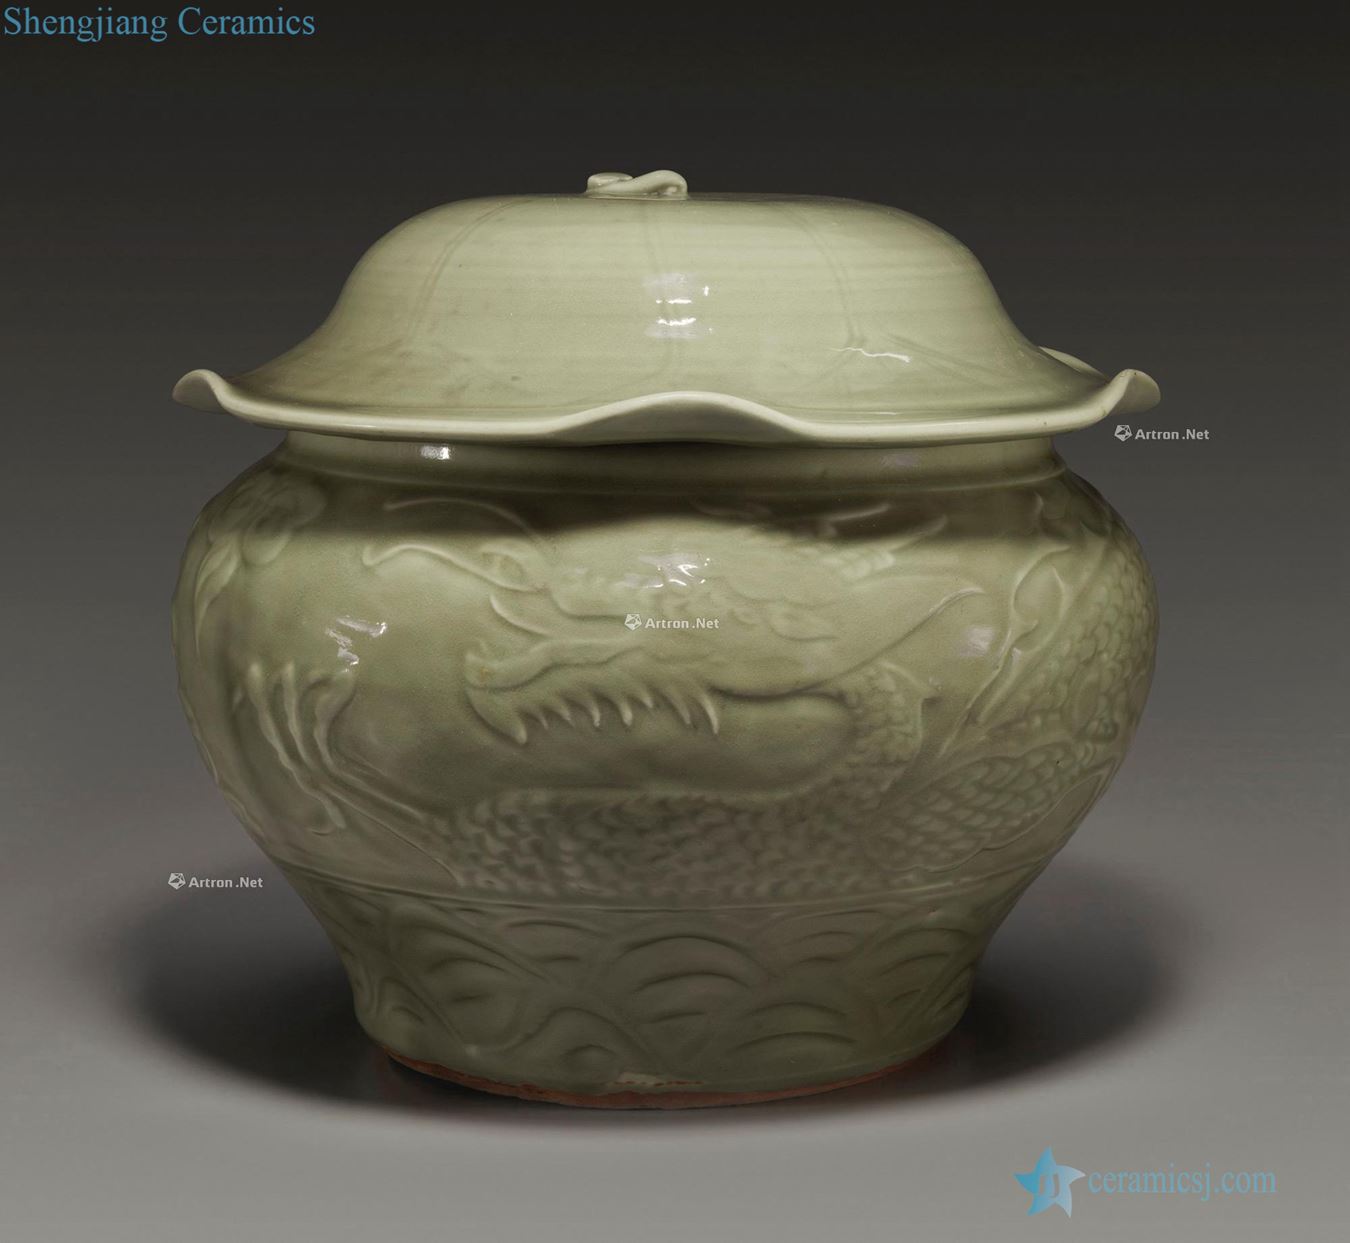 The yuan dynasty, the 14th century A RARE LONGQUAN CELADON CARVED JAR AND COVER